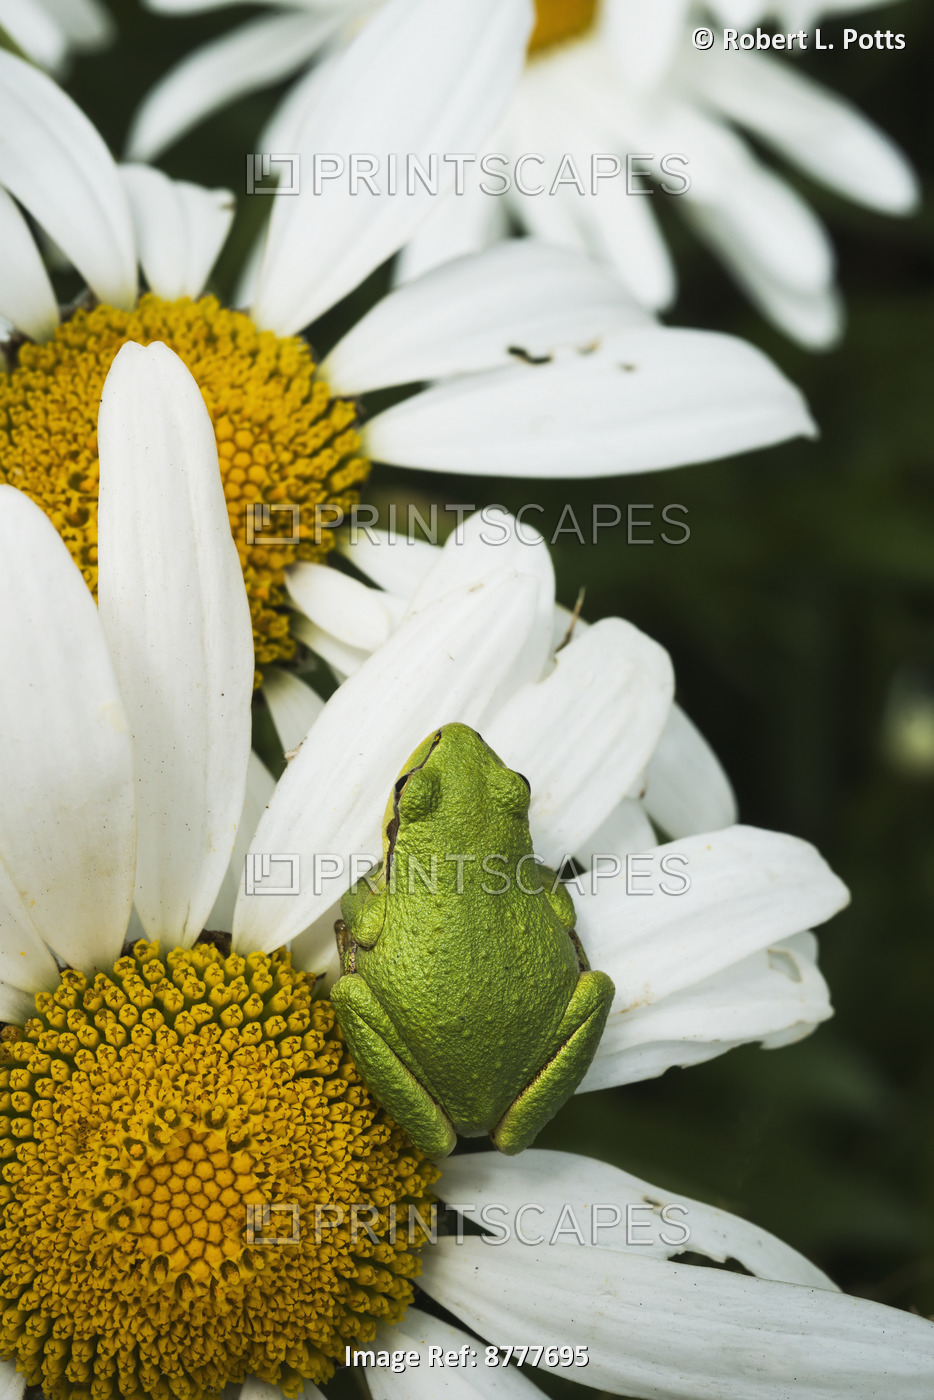 Tree Frog Rests On A Daisy; Astoria, Oregon, United States Of America